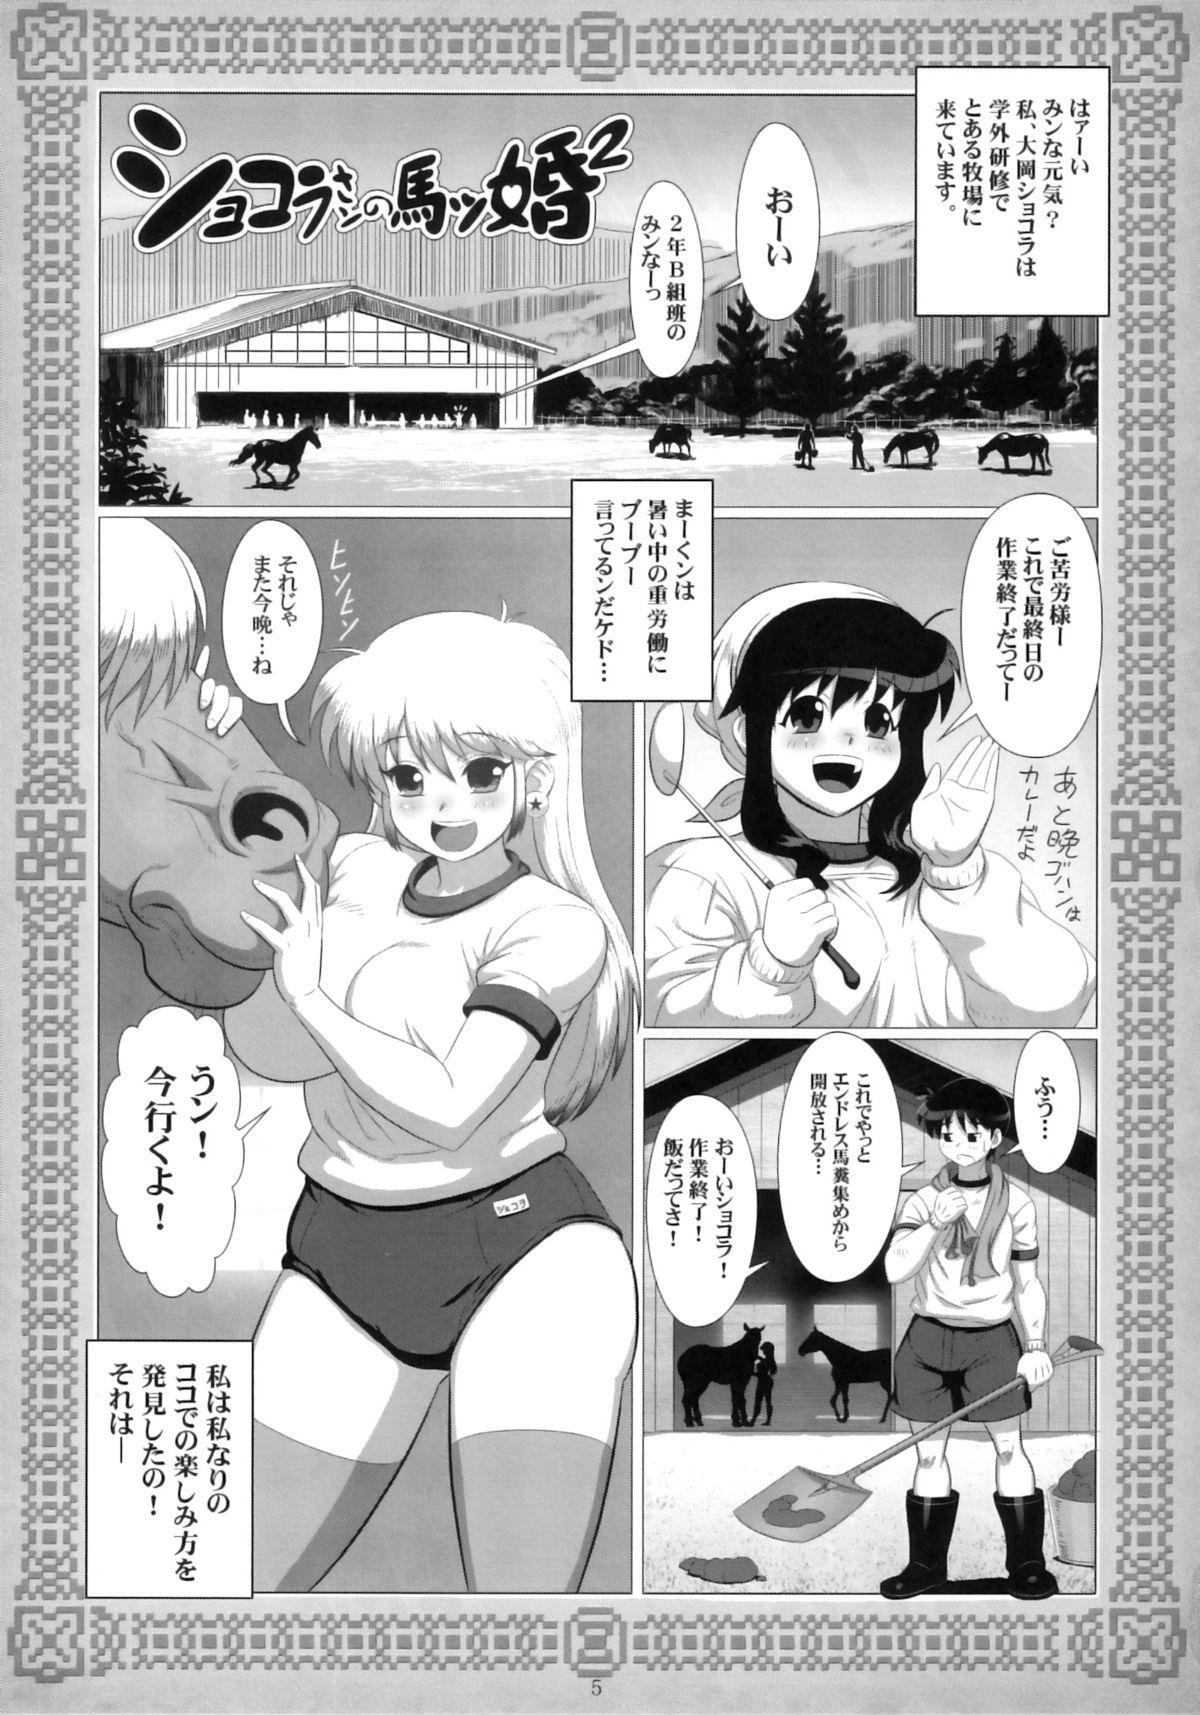 Oral Momo-an 24 Point Of View - Page 4